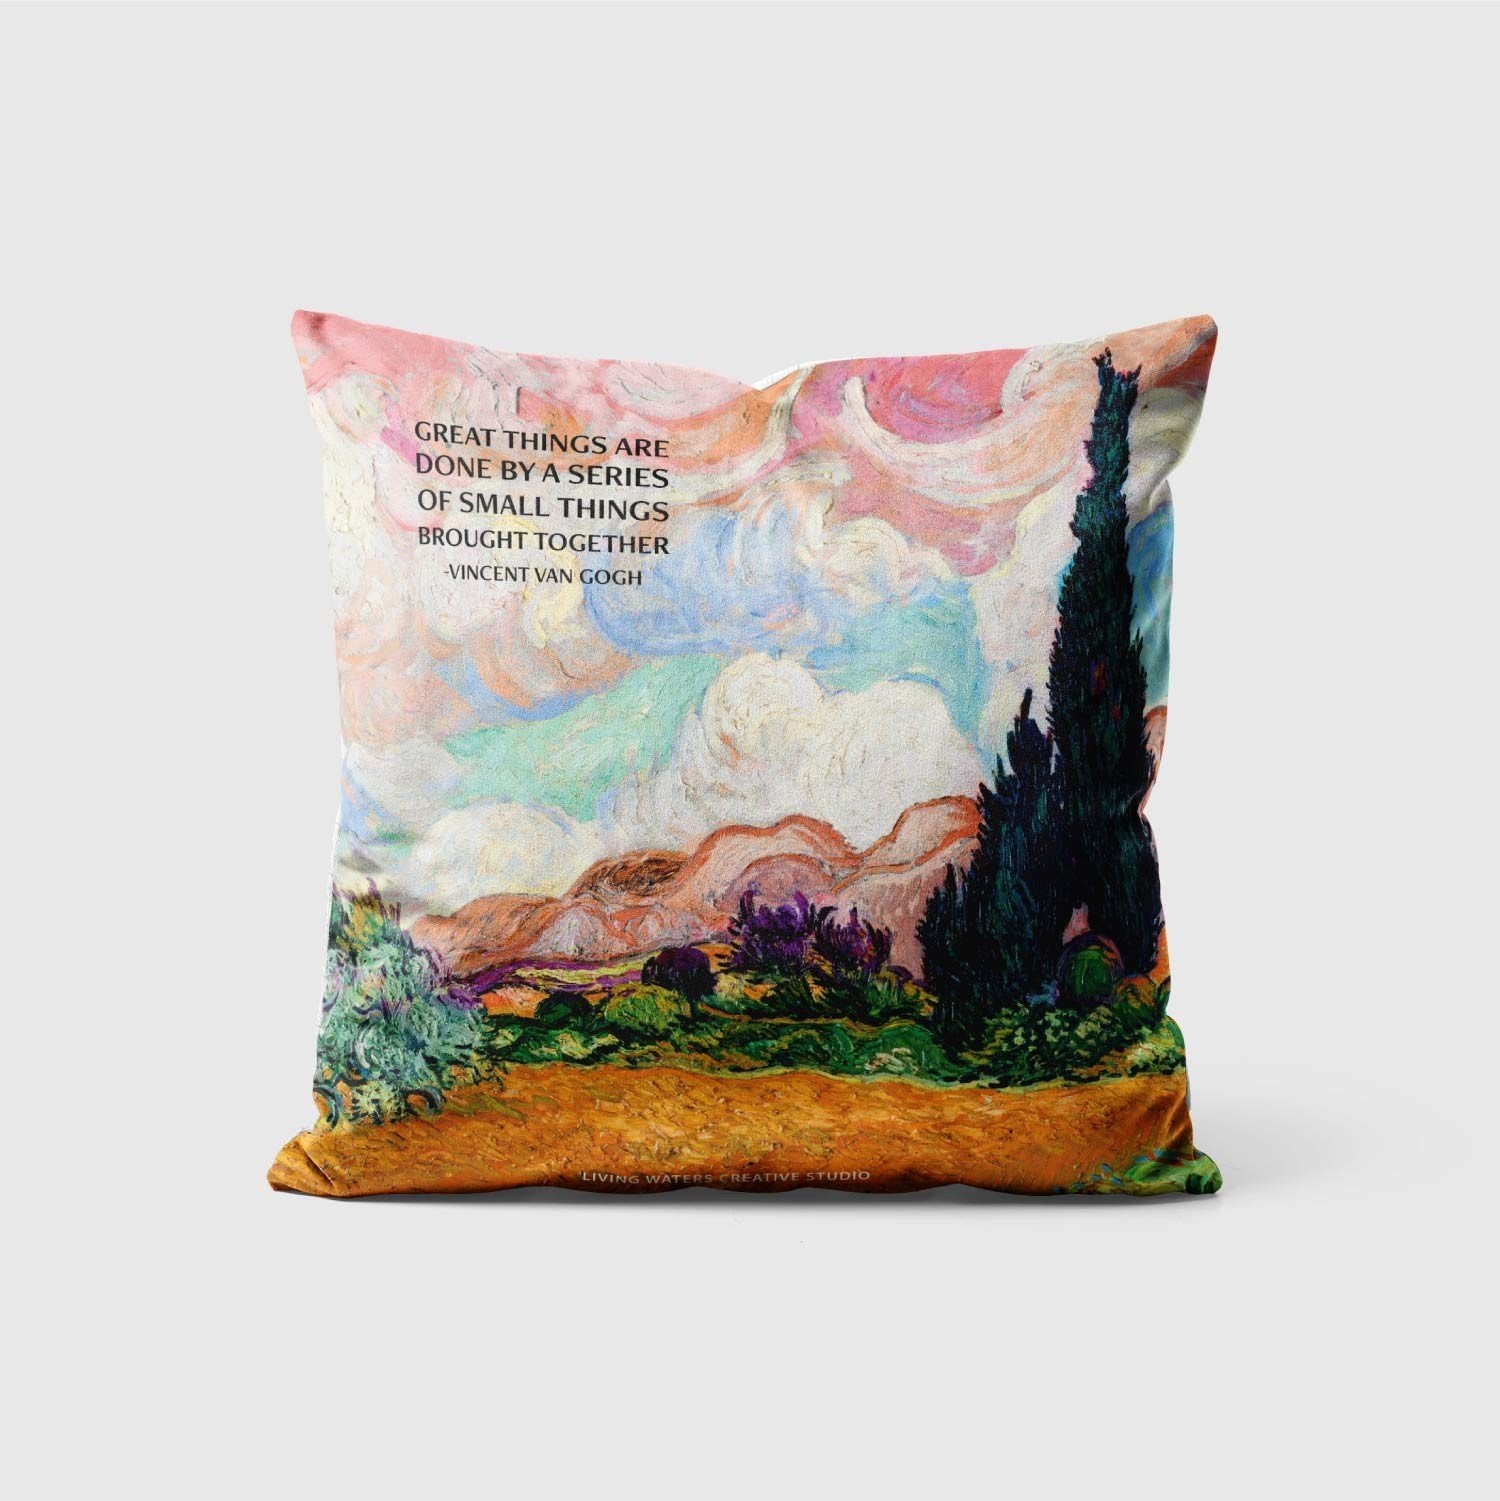 The Cypress Cushion Cover